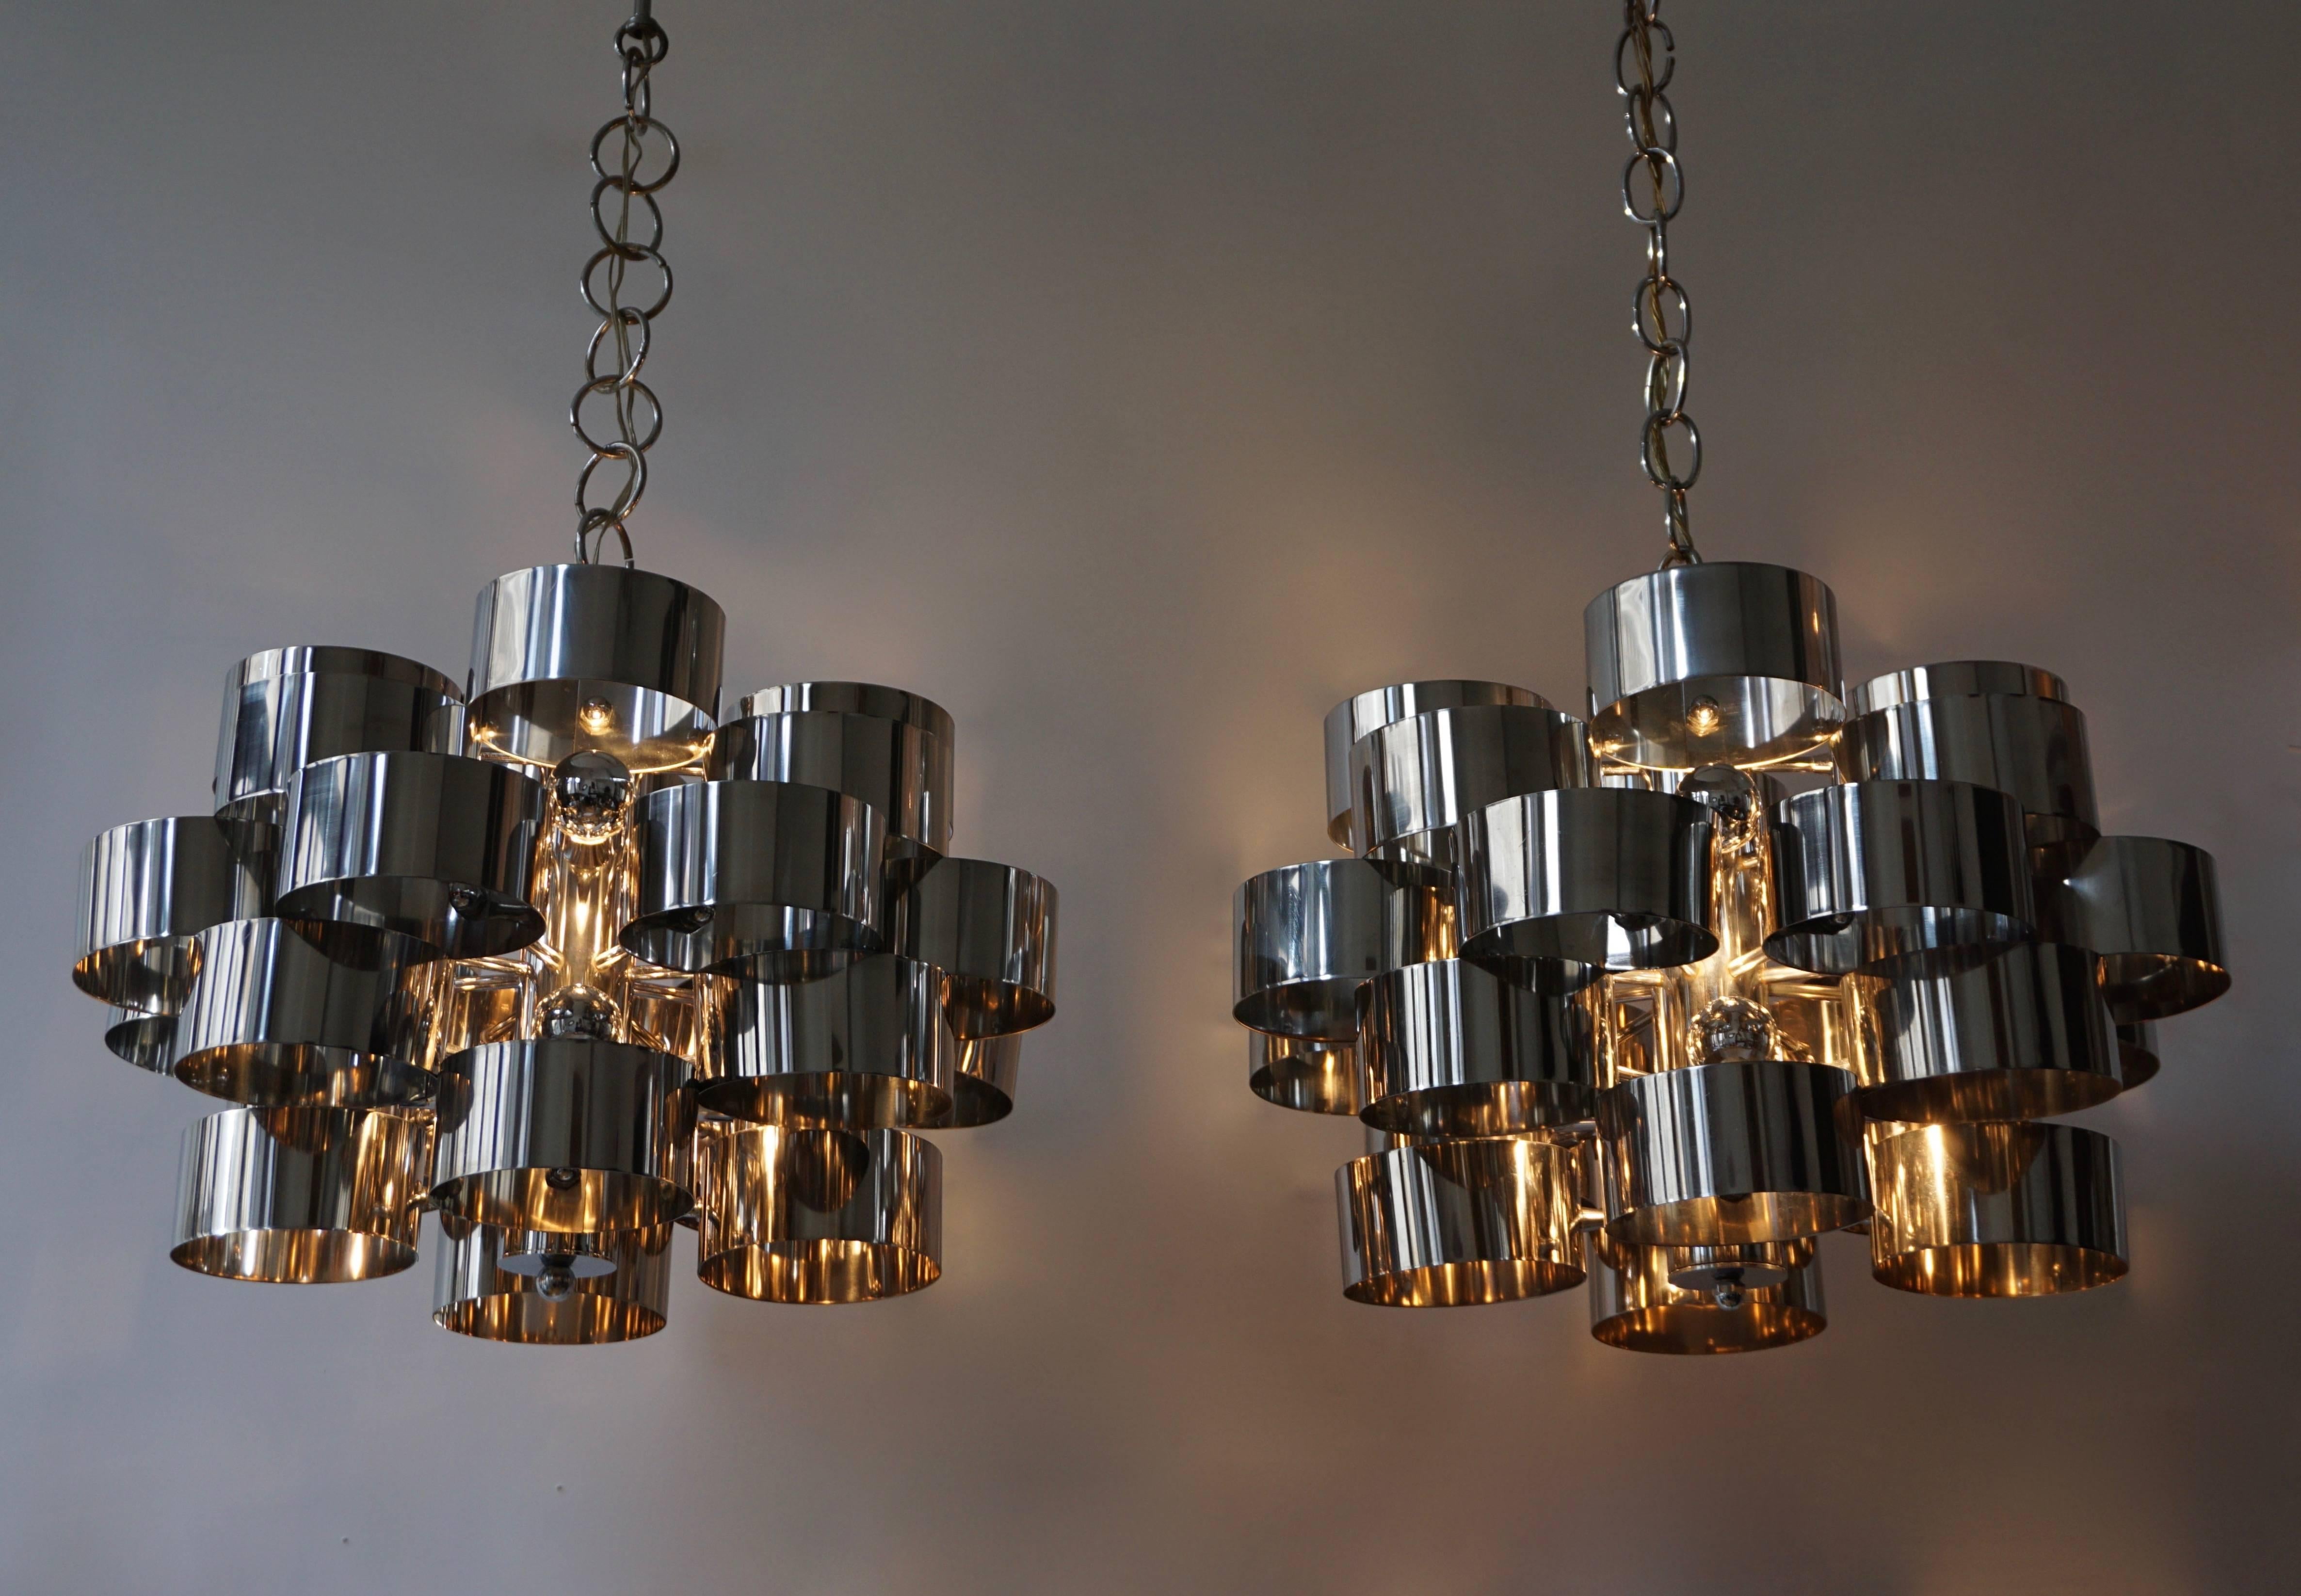 One of two  of 1970s chrome band loop chandeliers by Gaetano Sciolari.

Diameter 50 cm.
Height fixture 31 cm.

Please note that price is per item not for the set.
